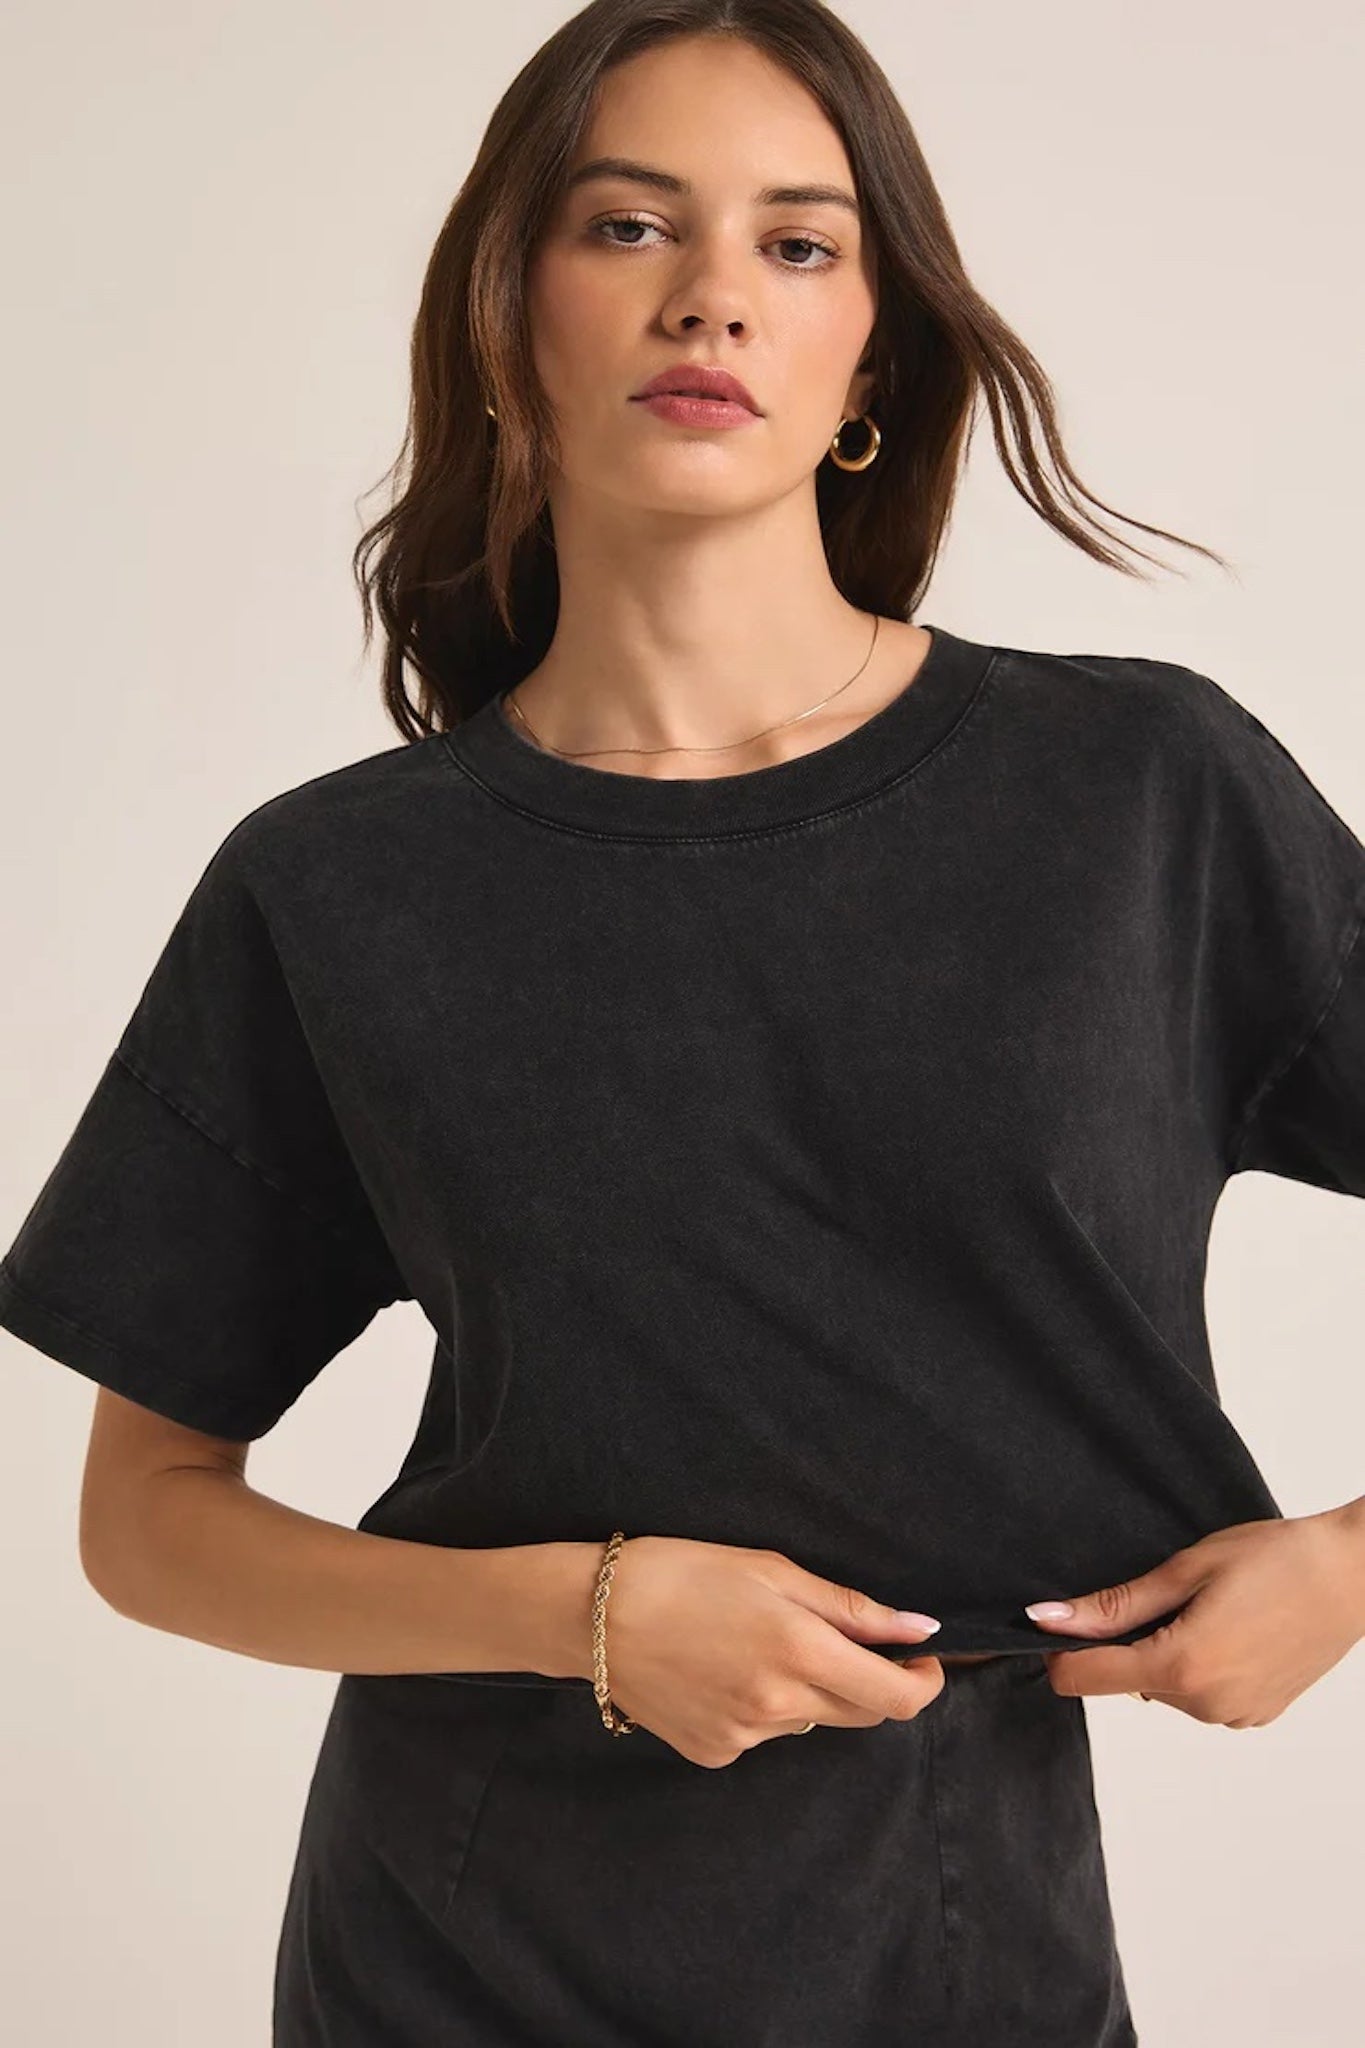 Sway Cropped Tee Tops Z Supply